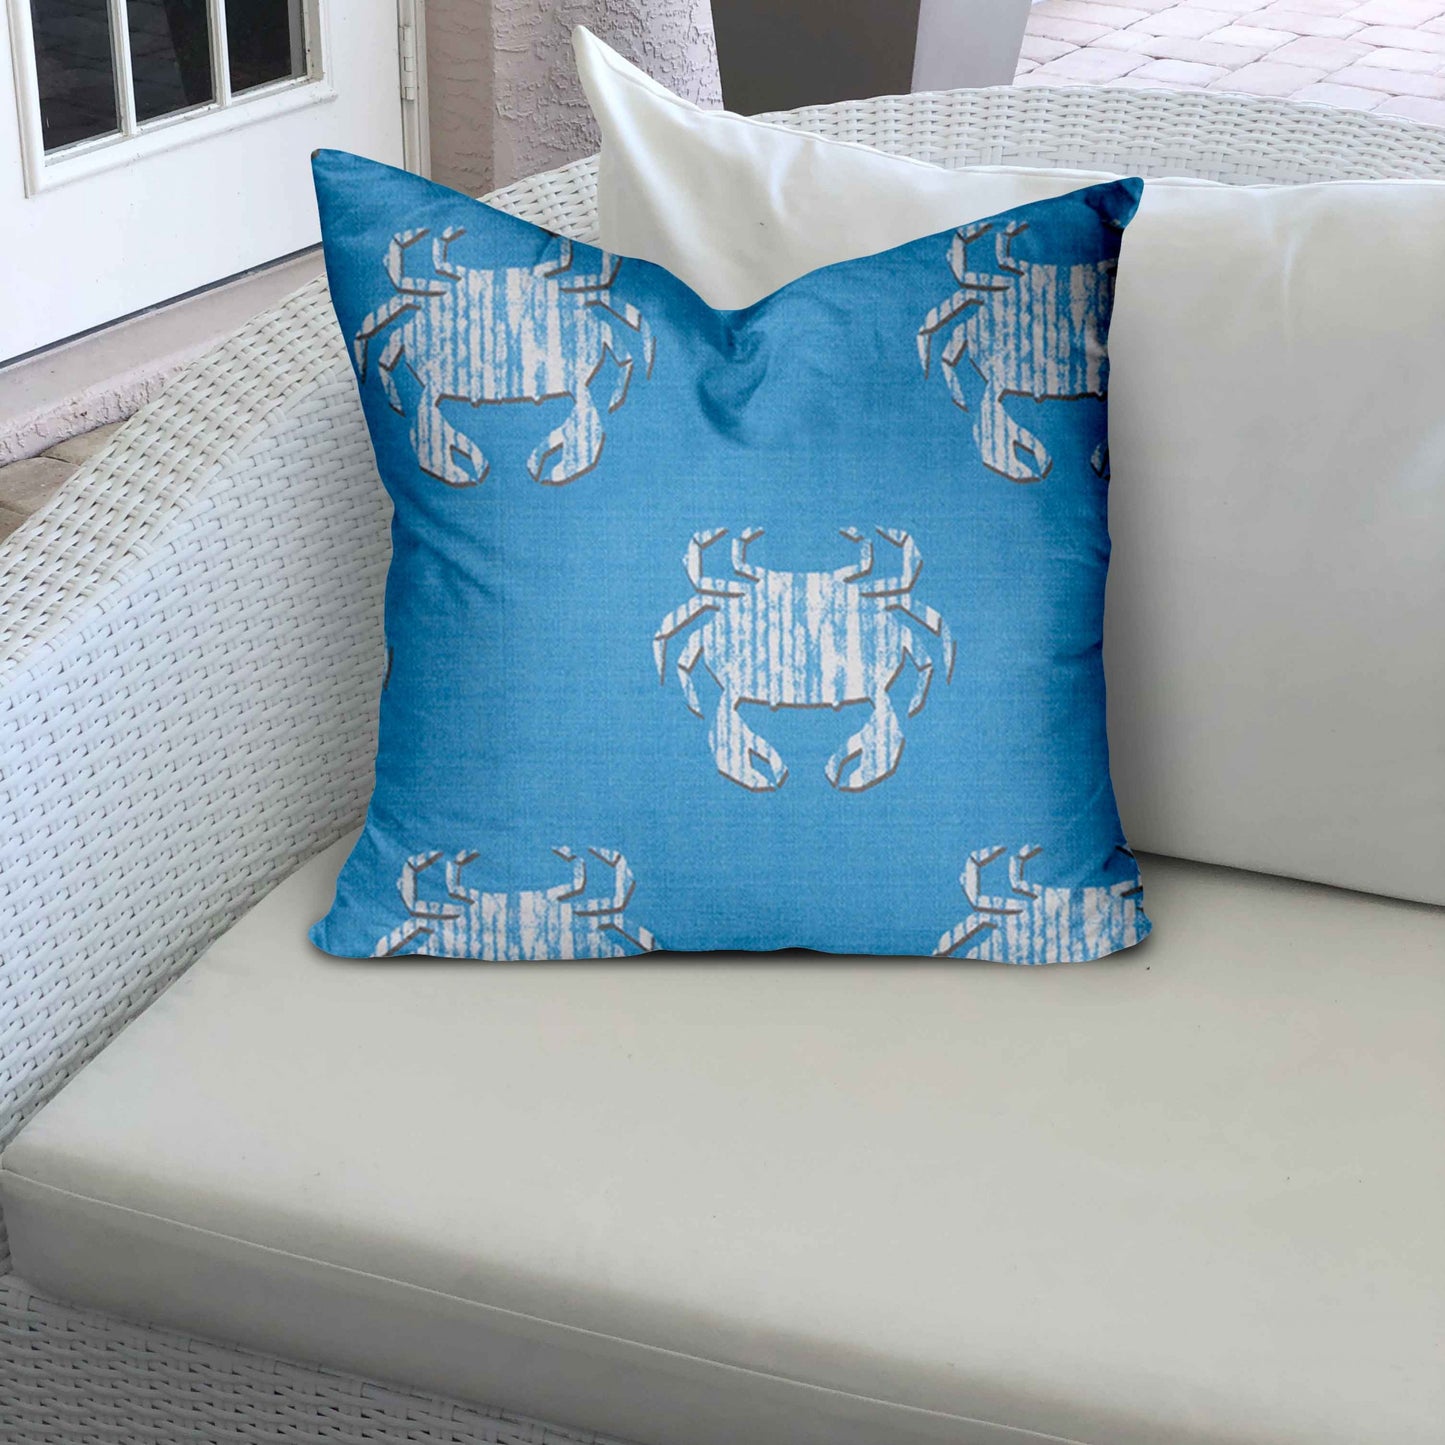 36" X 36" Blue And White Crab Enveloped Coastal Throw Indoor Outdoor Pillow Cover